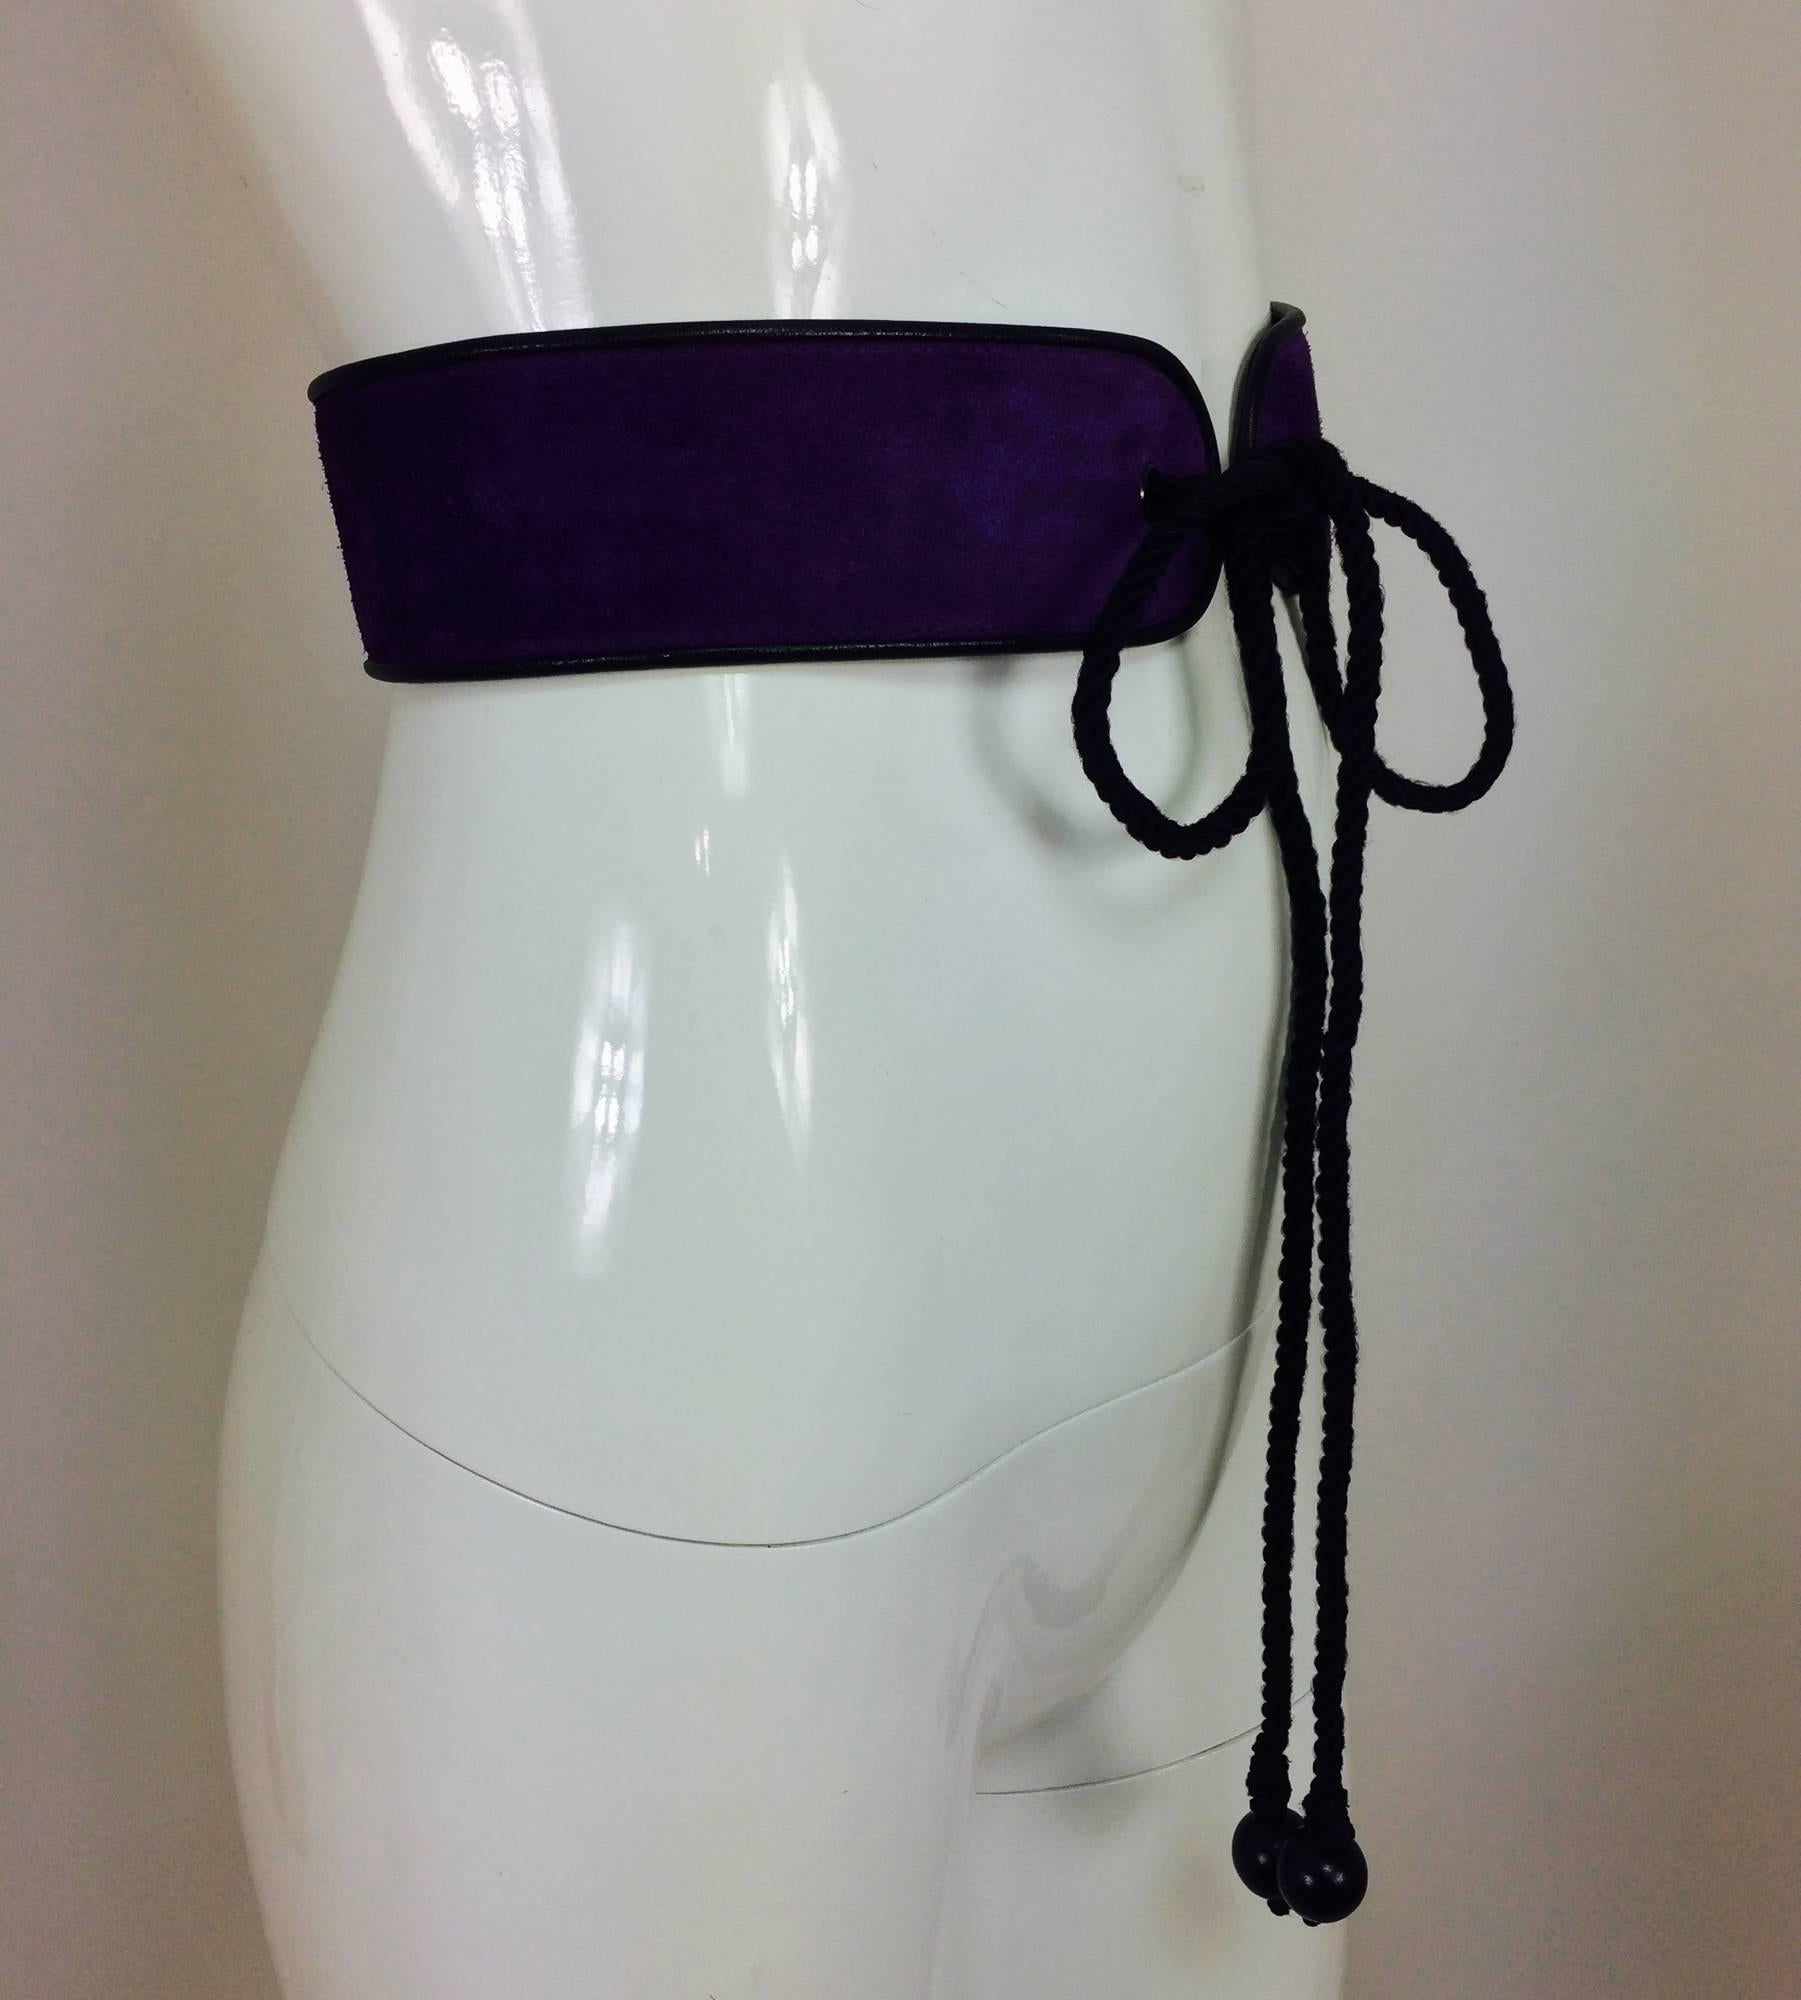 Vintage Yves Saint Laurent purple suede & leather cord tie belt 1960s...Purple suede with black leather trim waist belt with black cord ties that have a single wooden bead at each end...Marked size  A, Small...In excellent vintage